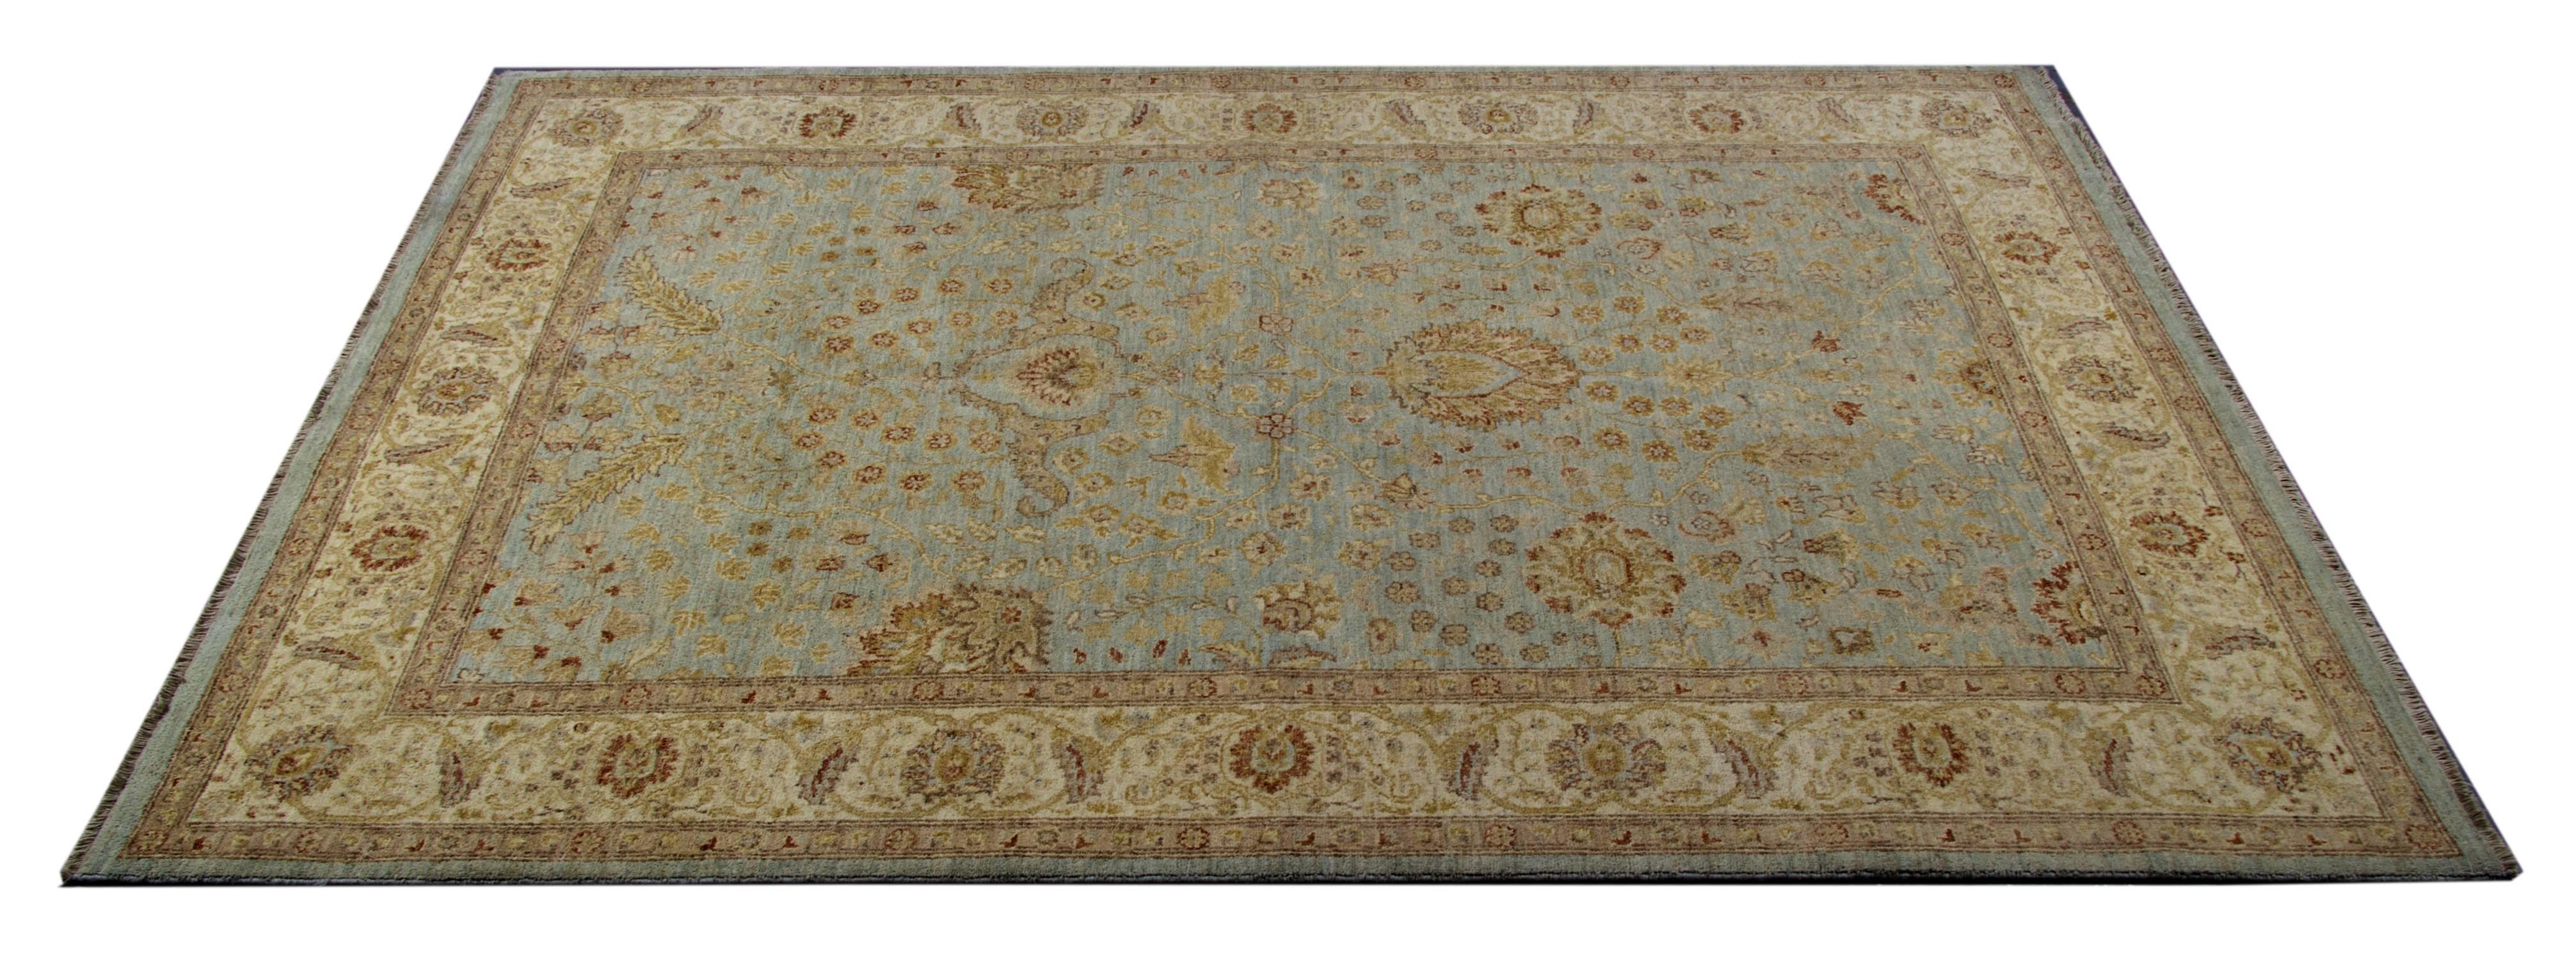 This blue rug is a Fine Ziegler Mahal Sultanabad woven rug made on our looms by our master weavers in Afghanistan. It is very fine carpet rug with all natural veg dyes. This floral rug has all hand spun wool. The large-scale design makes Sultanabad